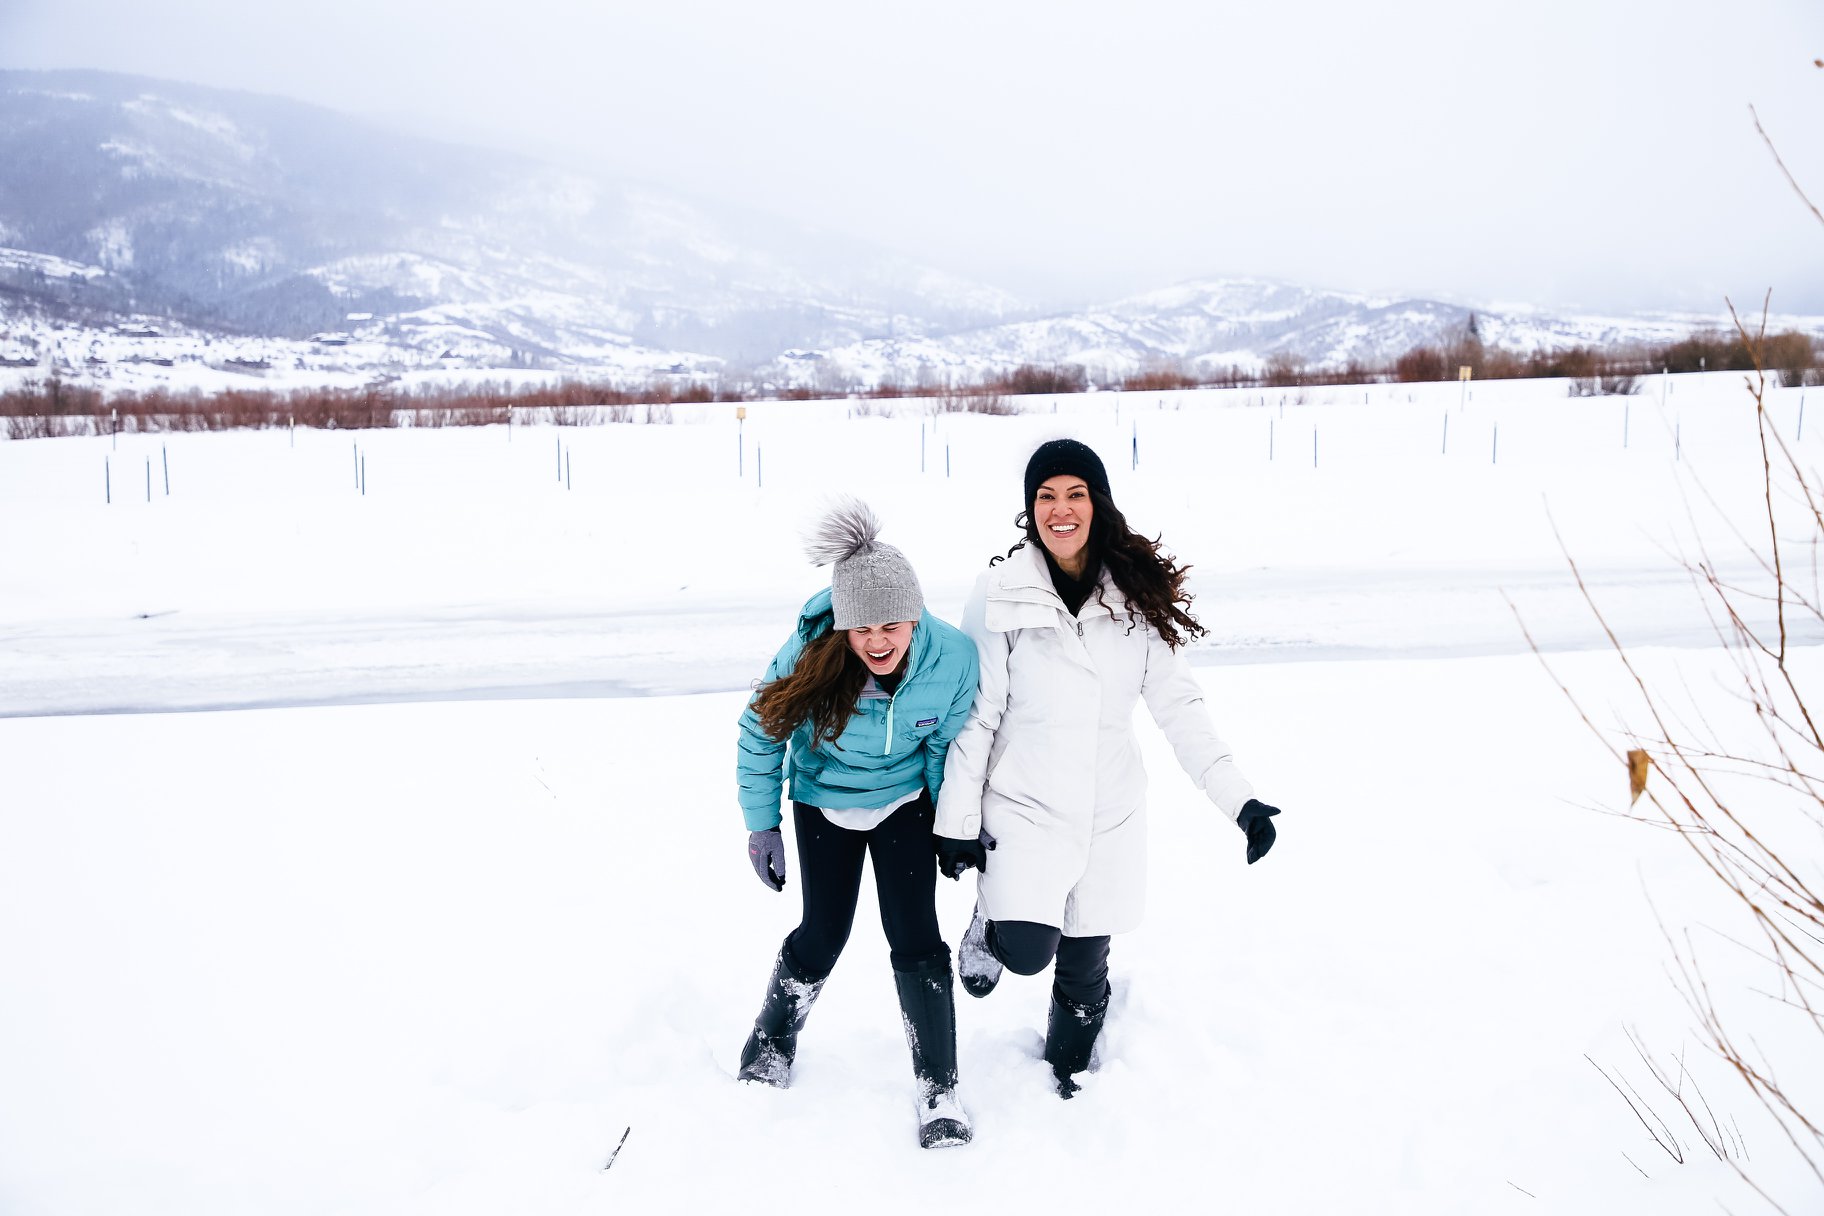 steamboat springs winter photography